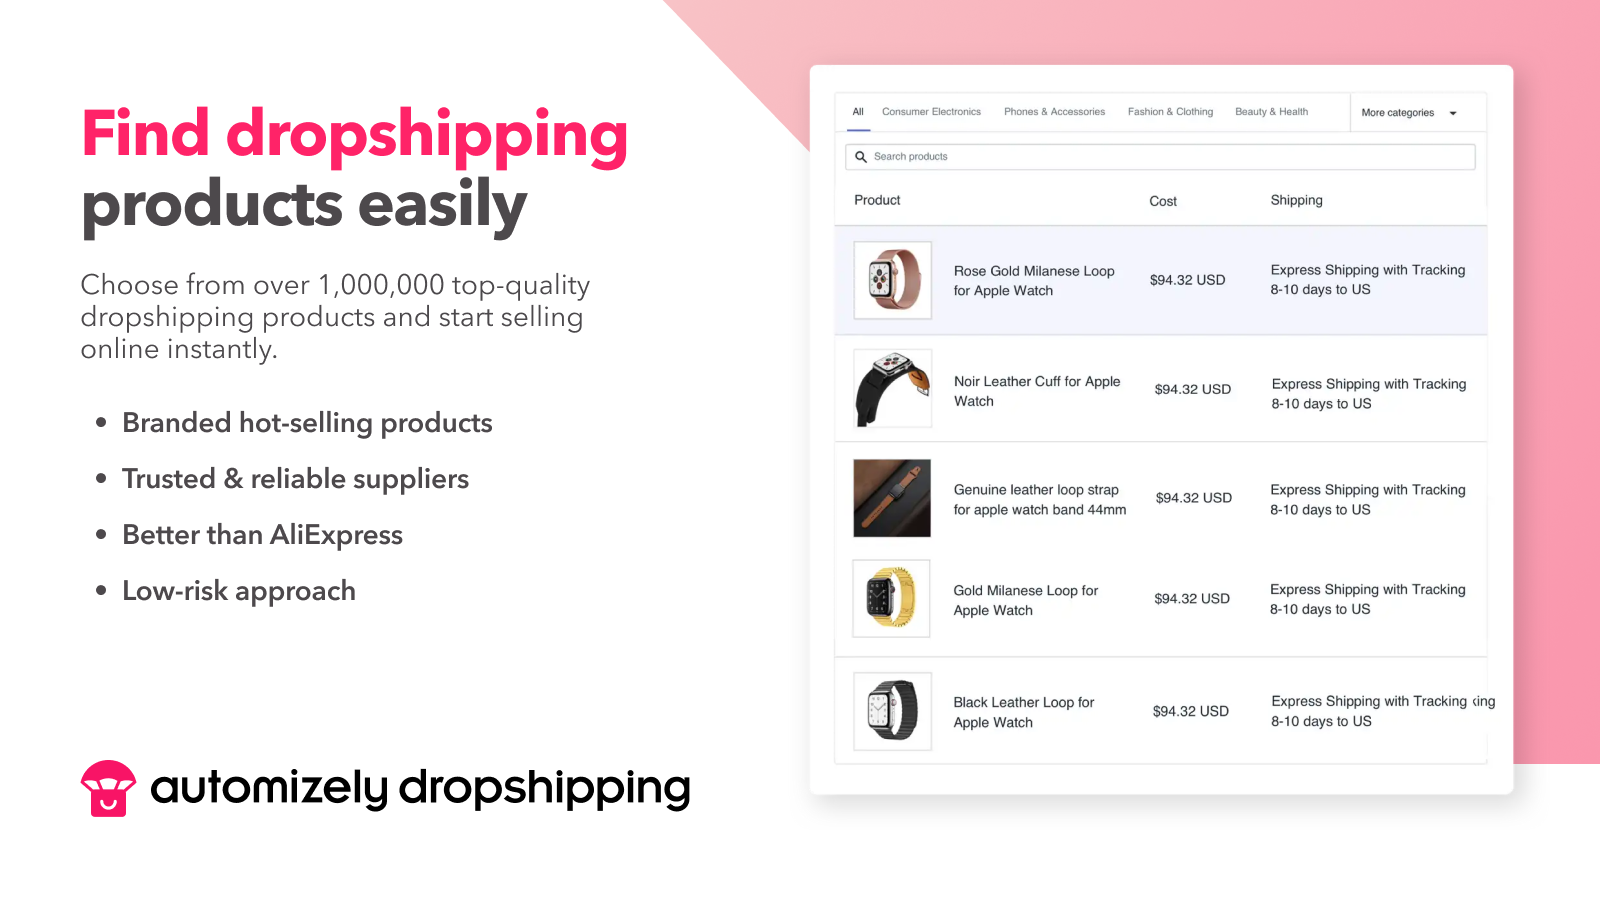 Find best product easily and start selling online in seconds